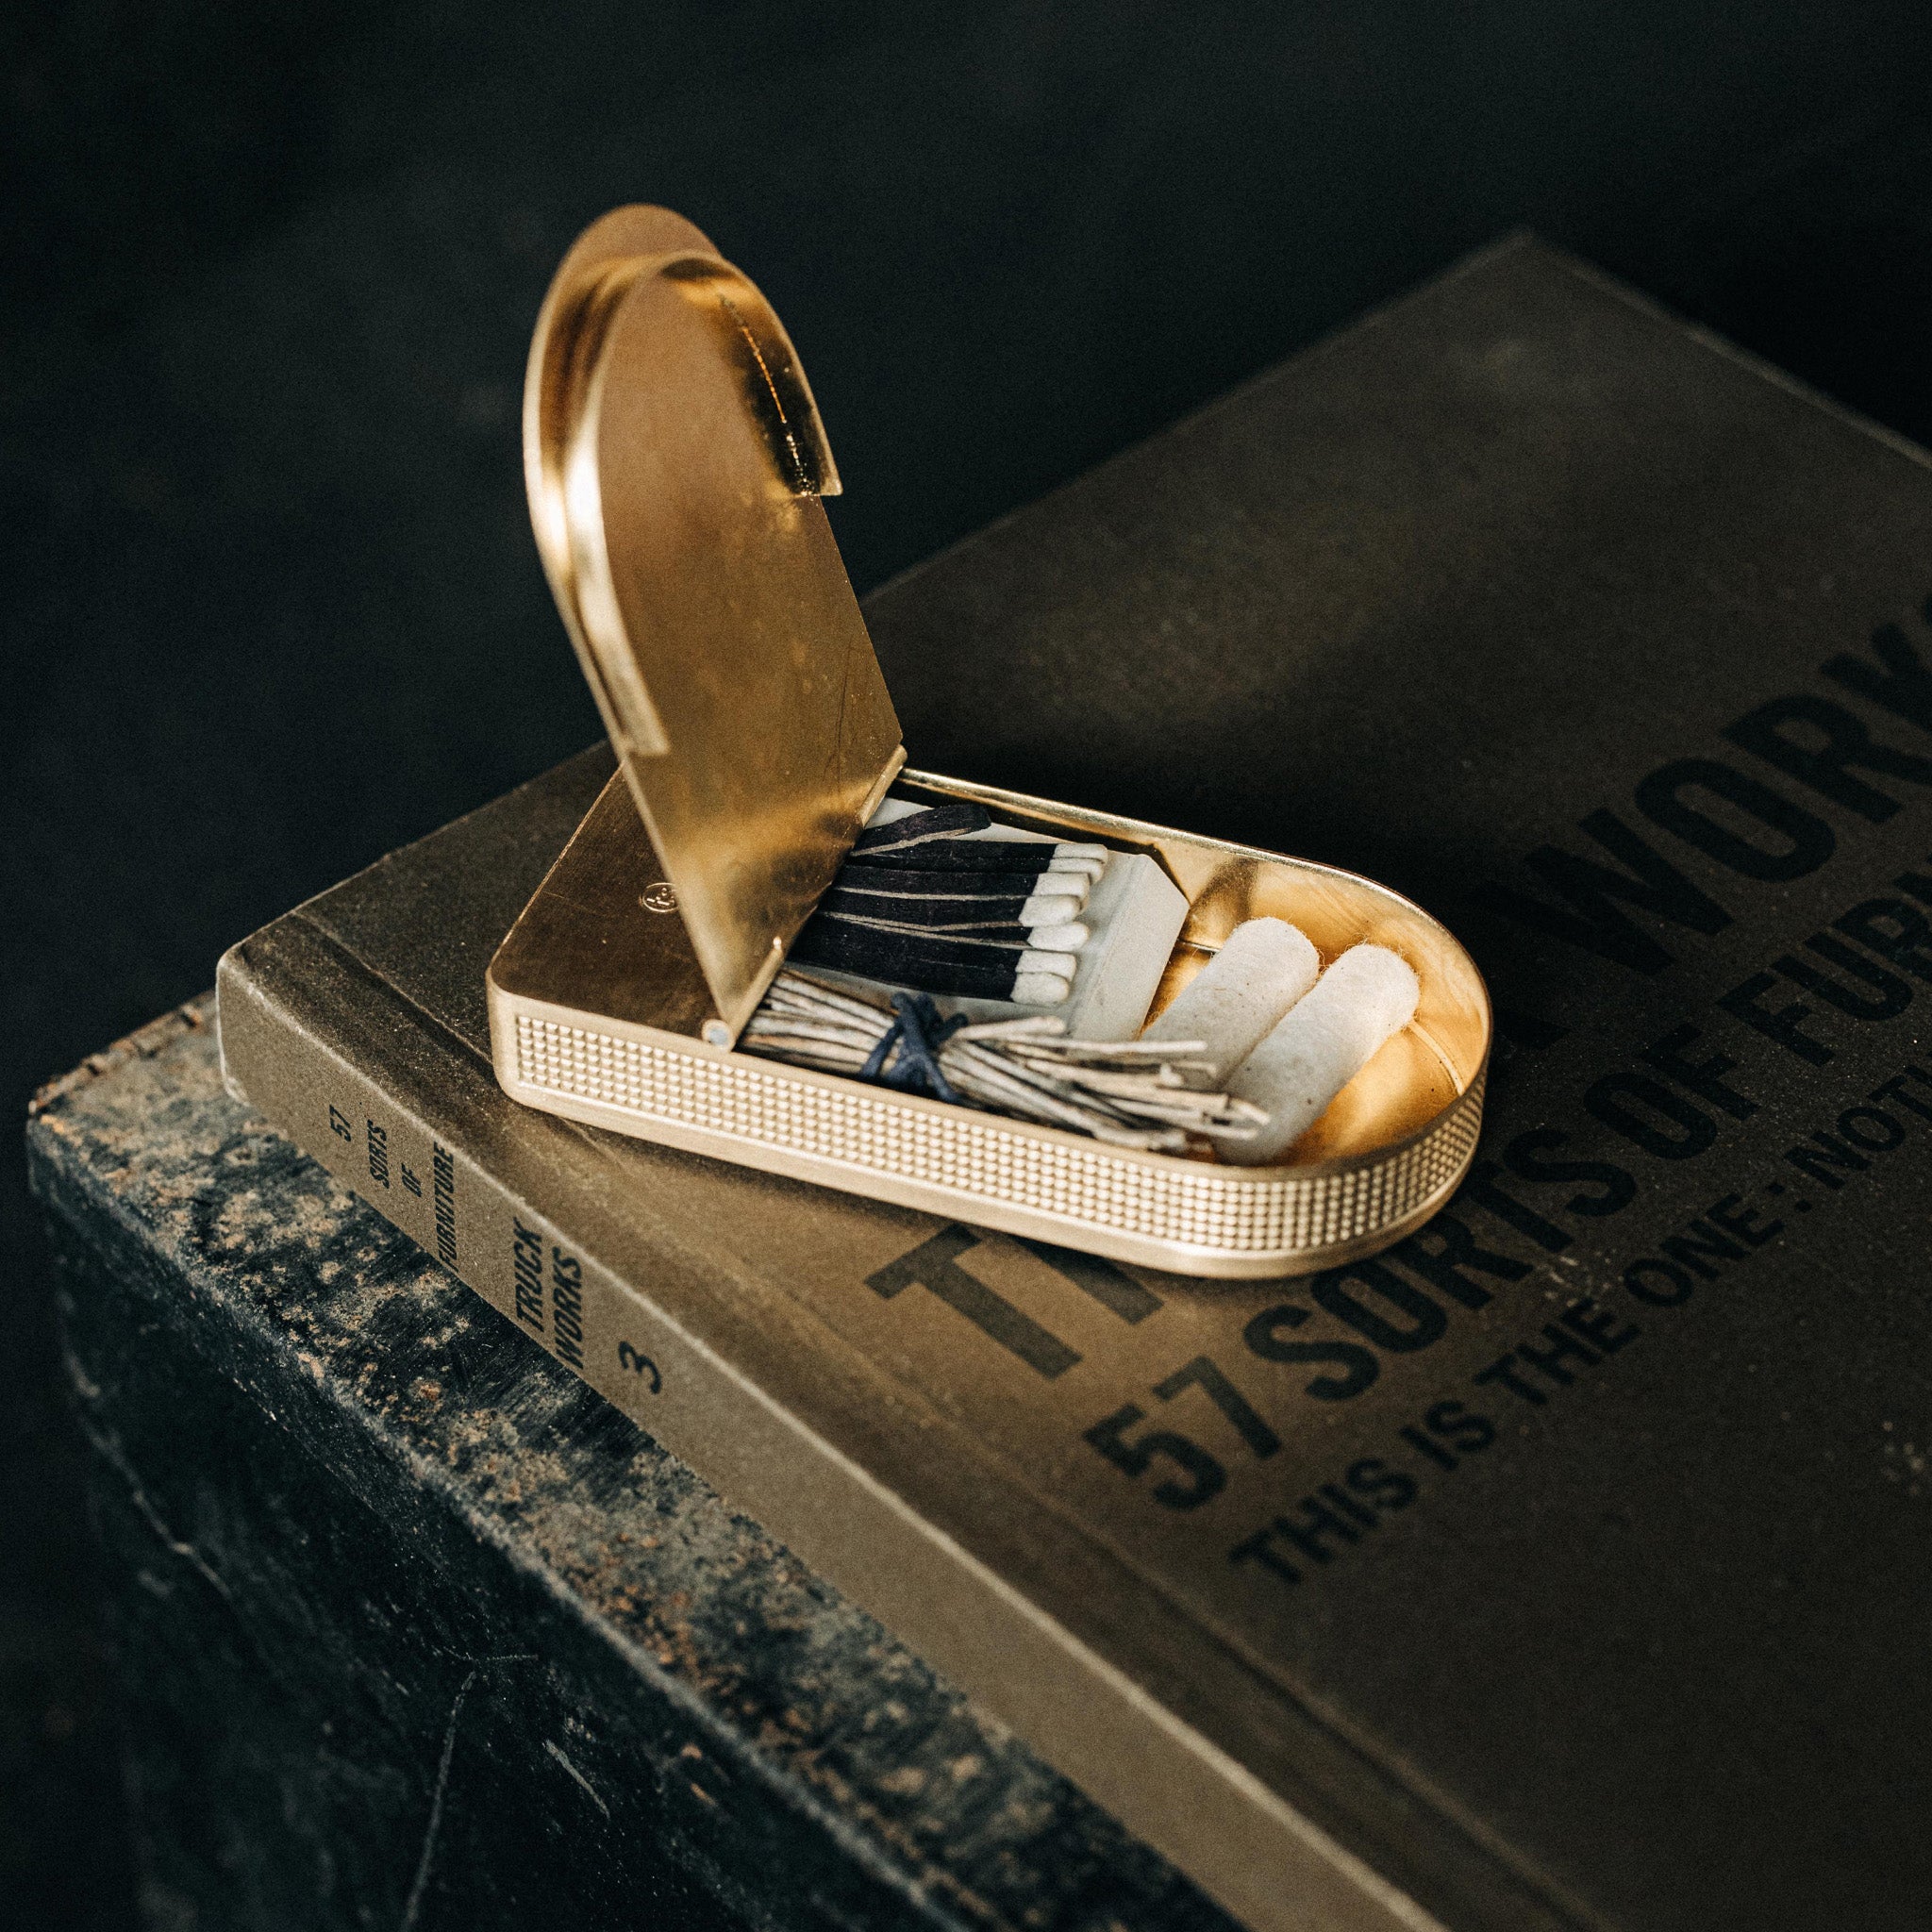 The Tinder Box in Brass  Taylor Stitch - Classic Men's Clothing